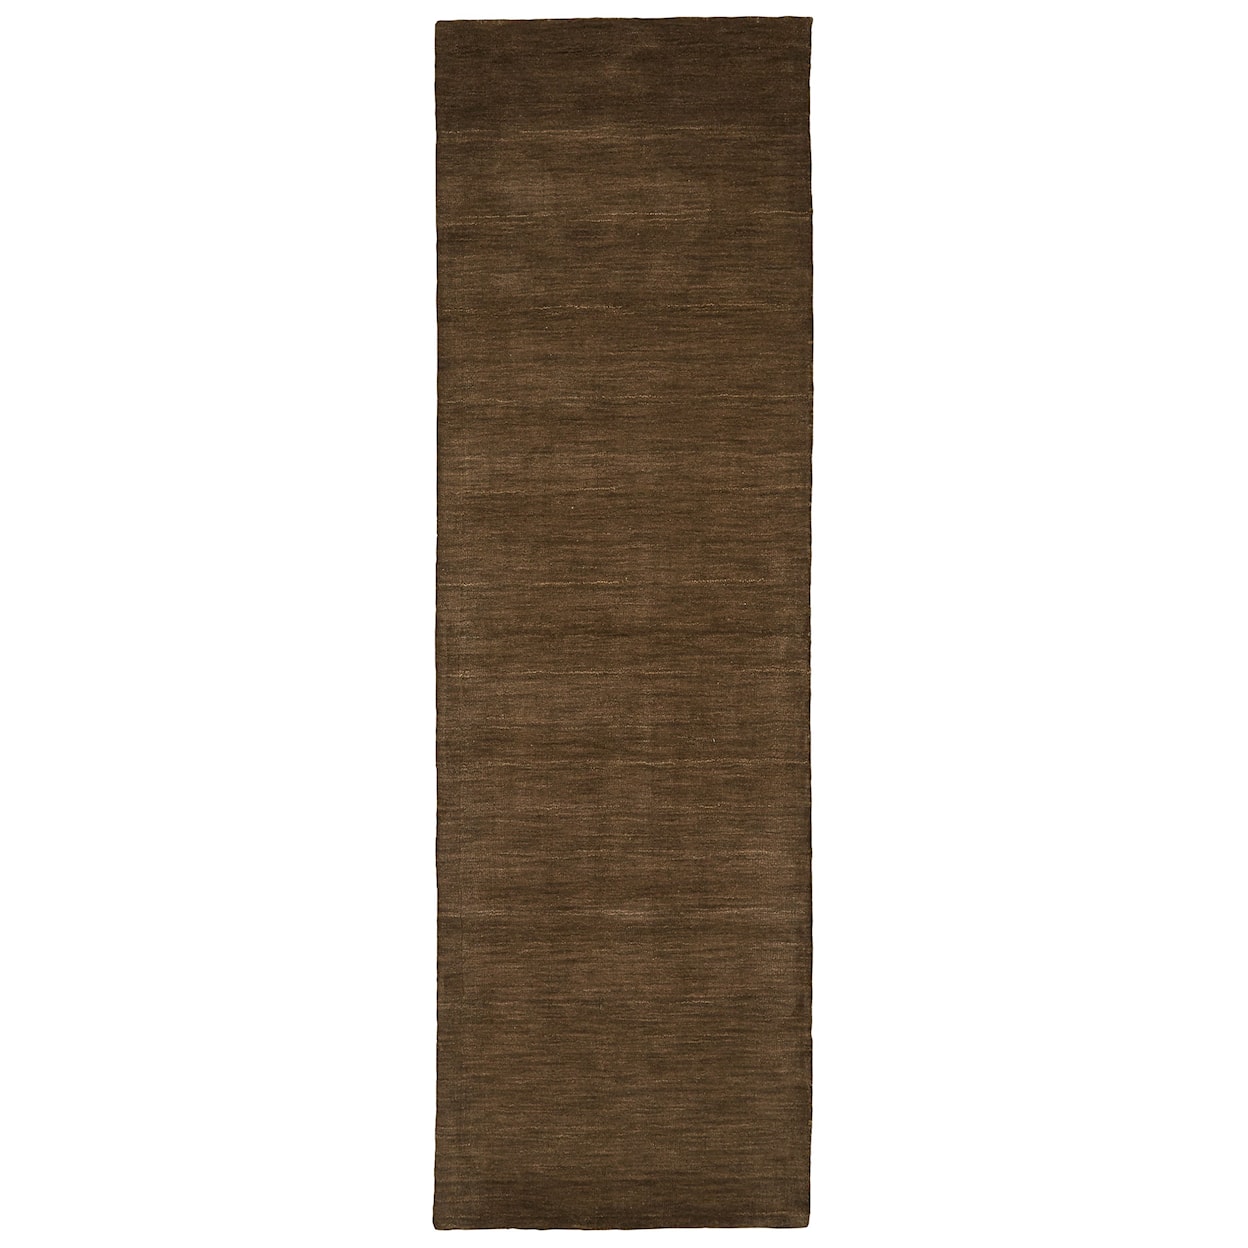 Feizy Rugs Luna Brown 9'-6" x 13'-6" Area Rug